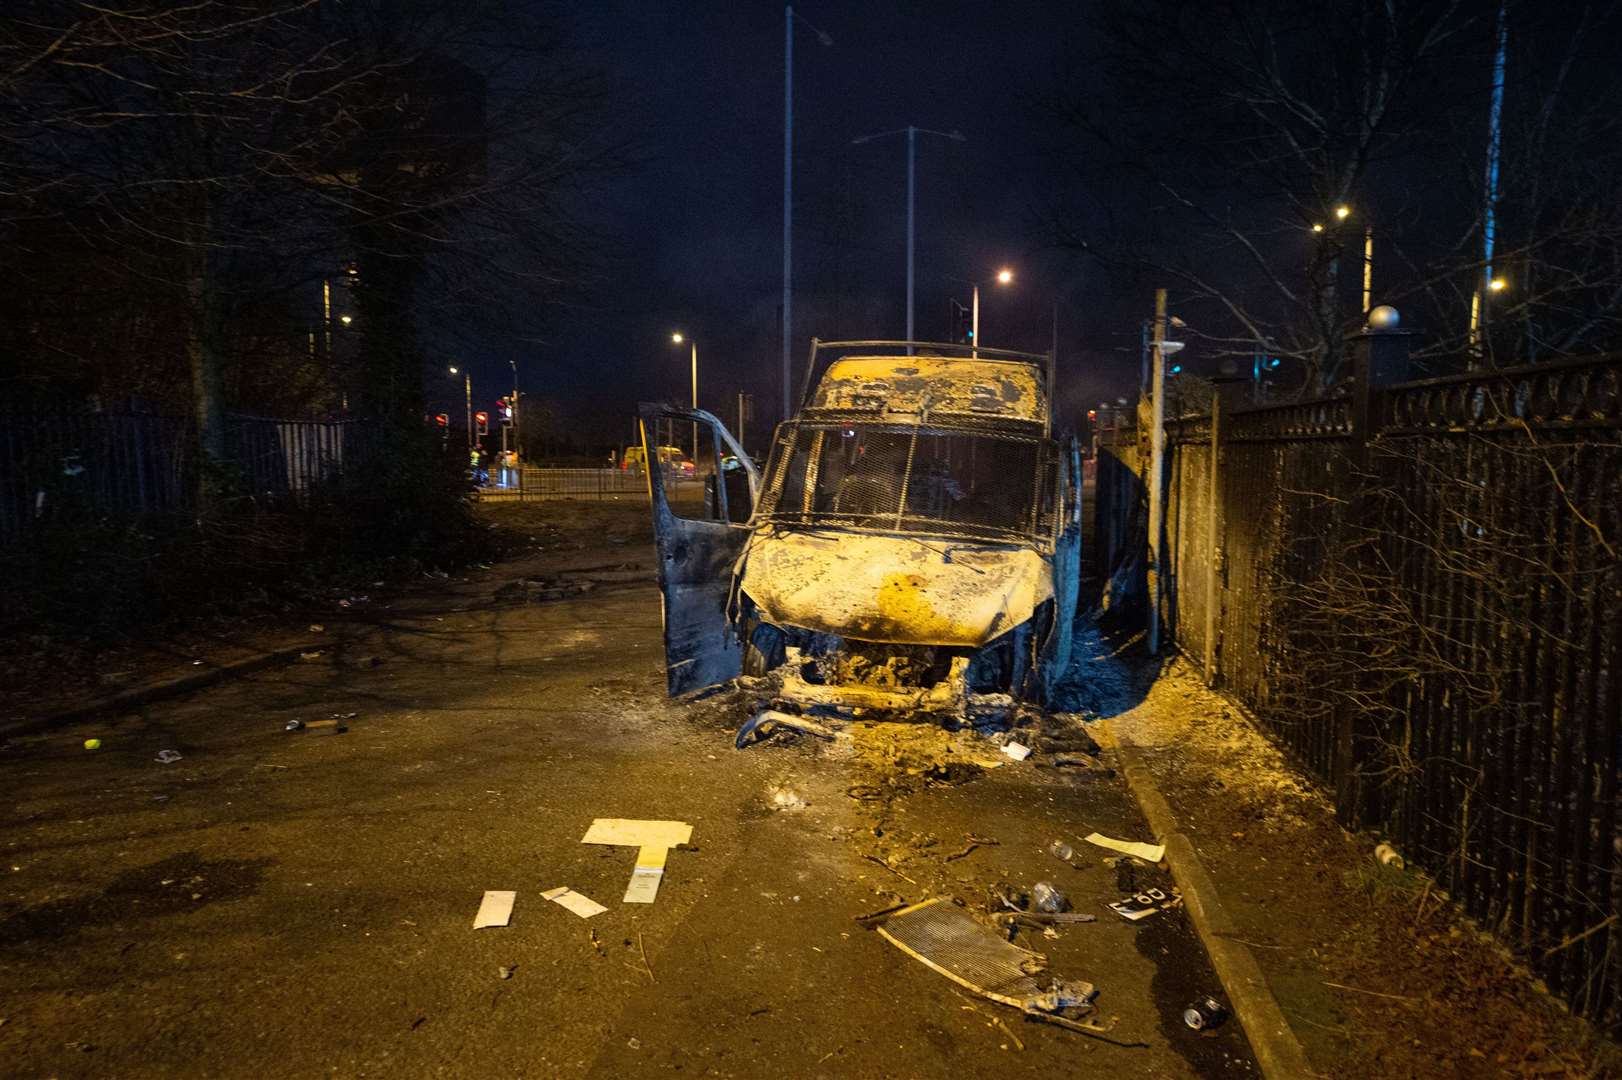 The burnt out police van after the demonstration outside the Suites Hotel in Knowsley, Merseyside (Peter Powell/PA)